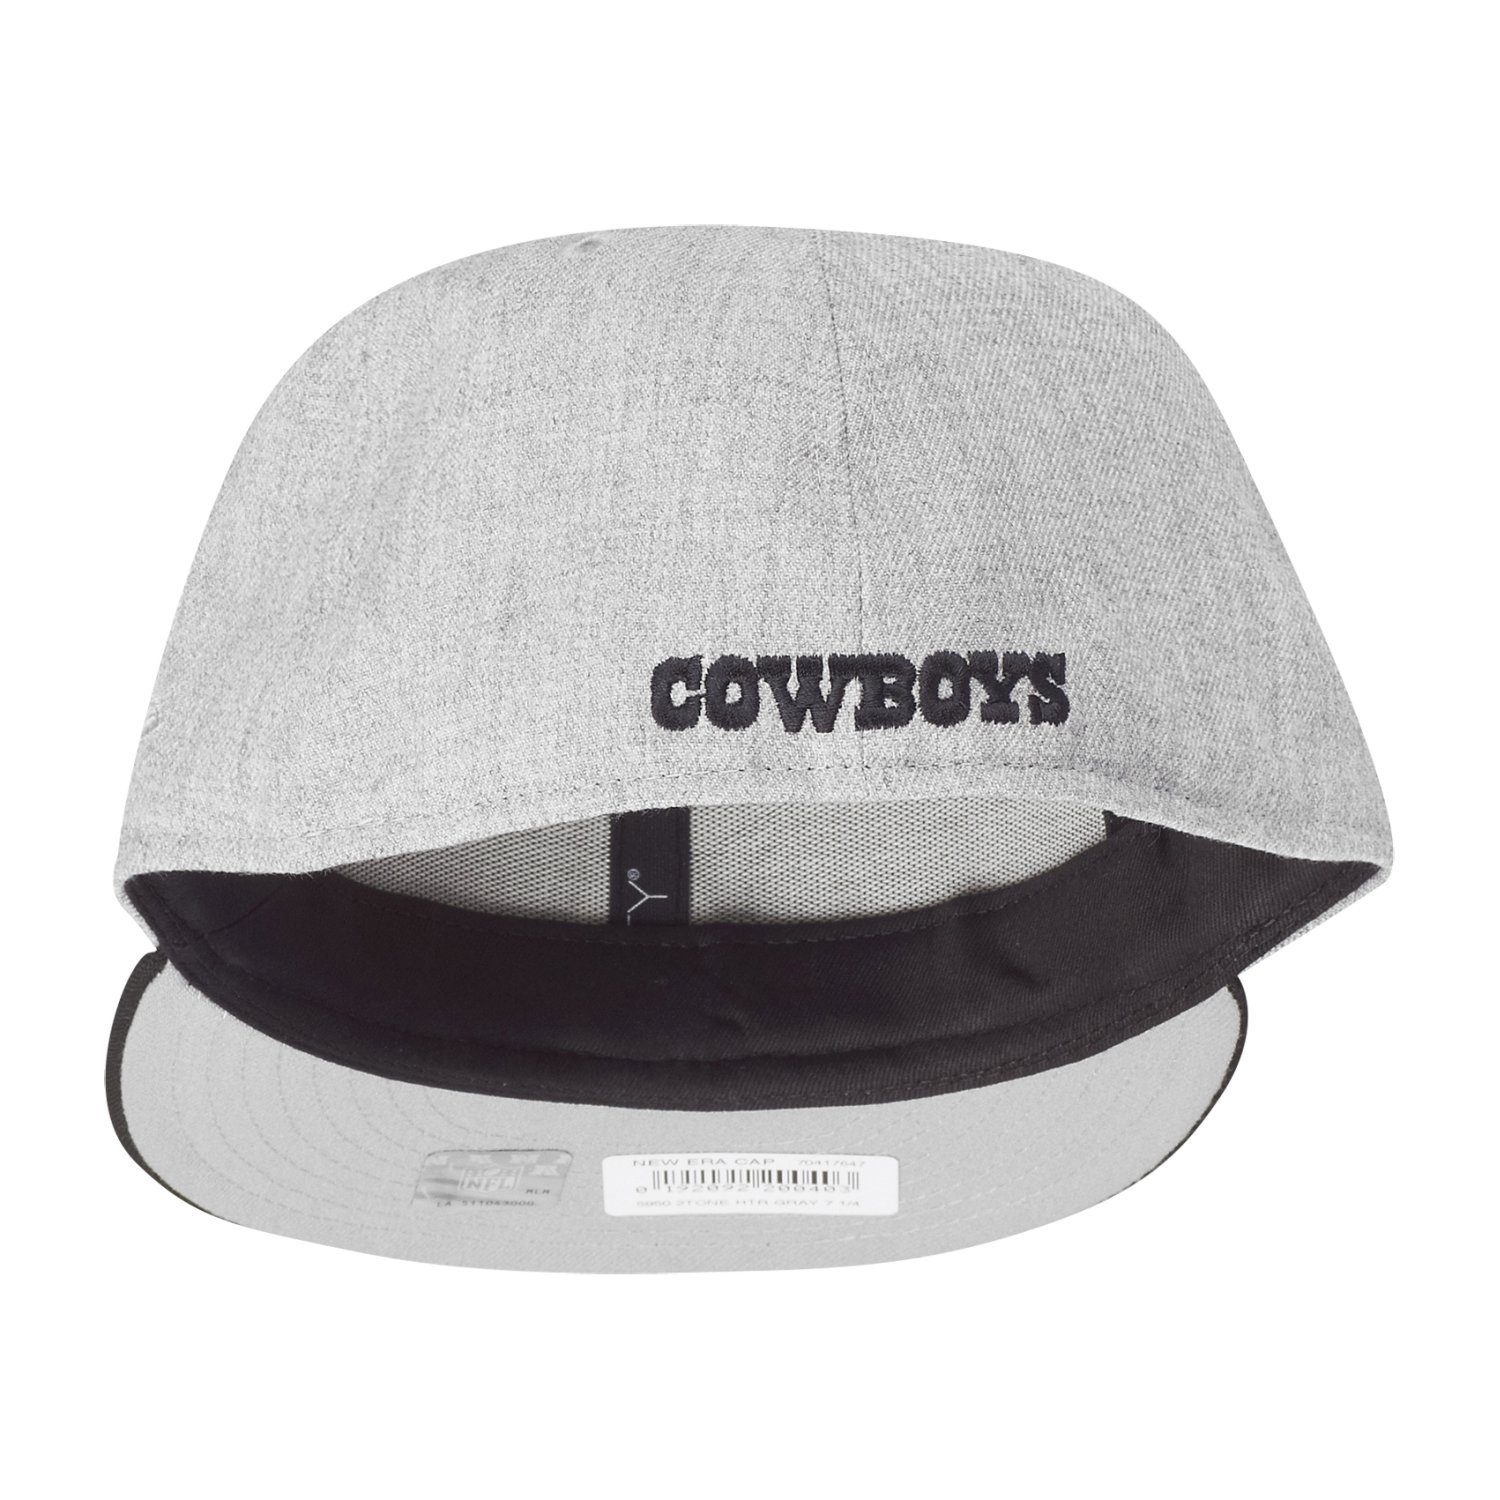 HEATHER New Cap Fitted Dallas Cowboys 59Fifty Era